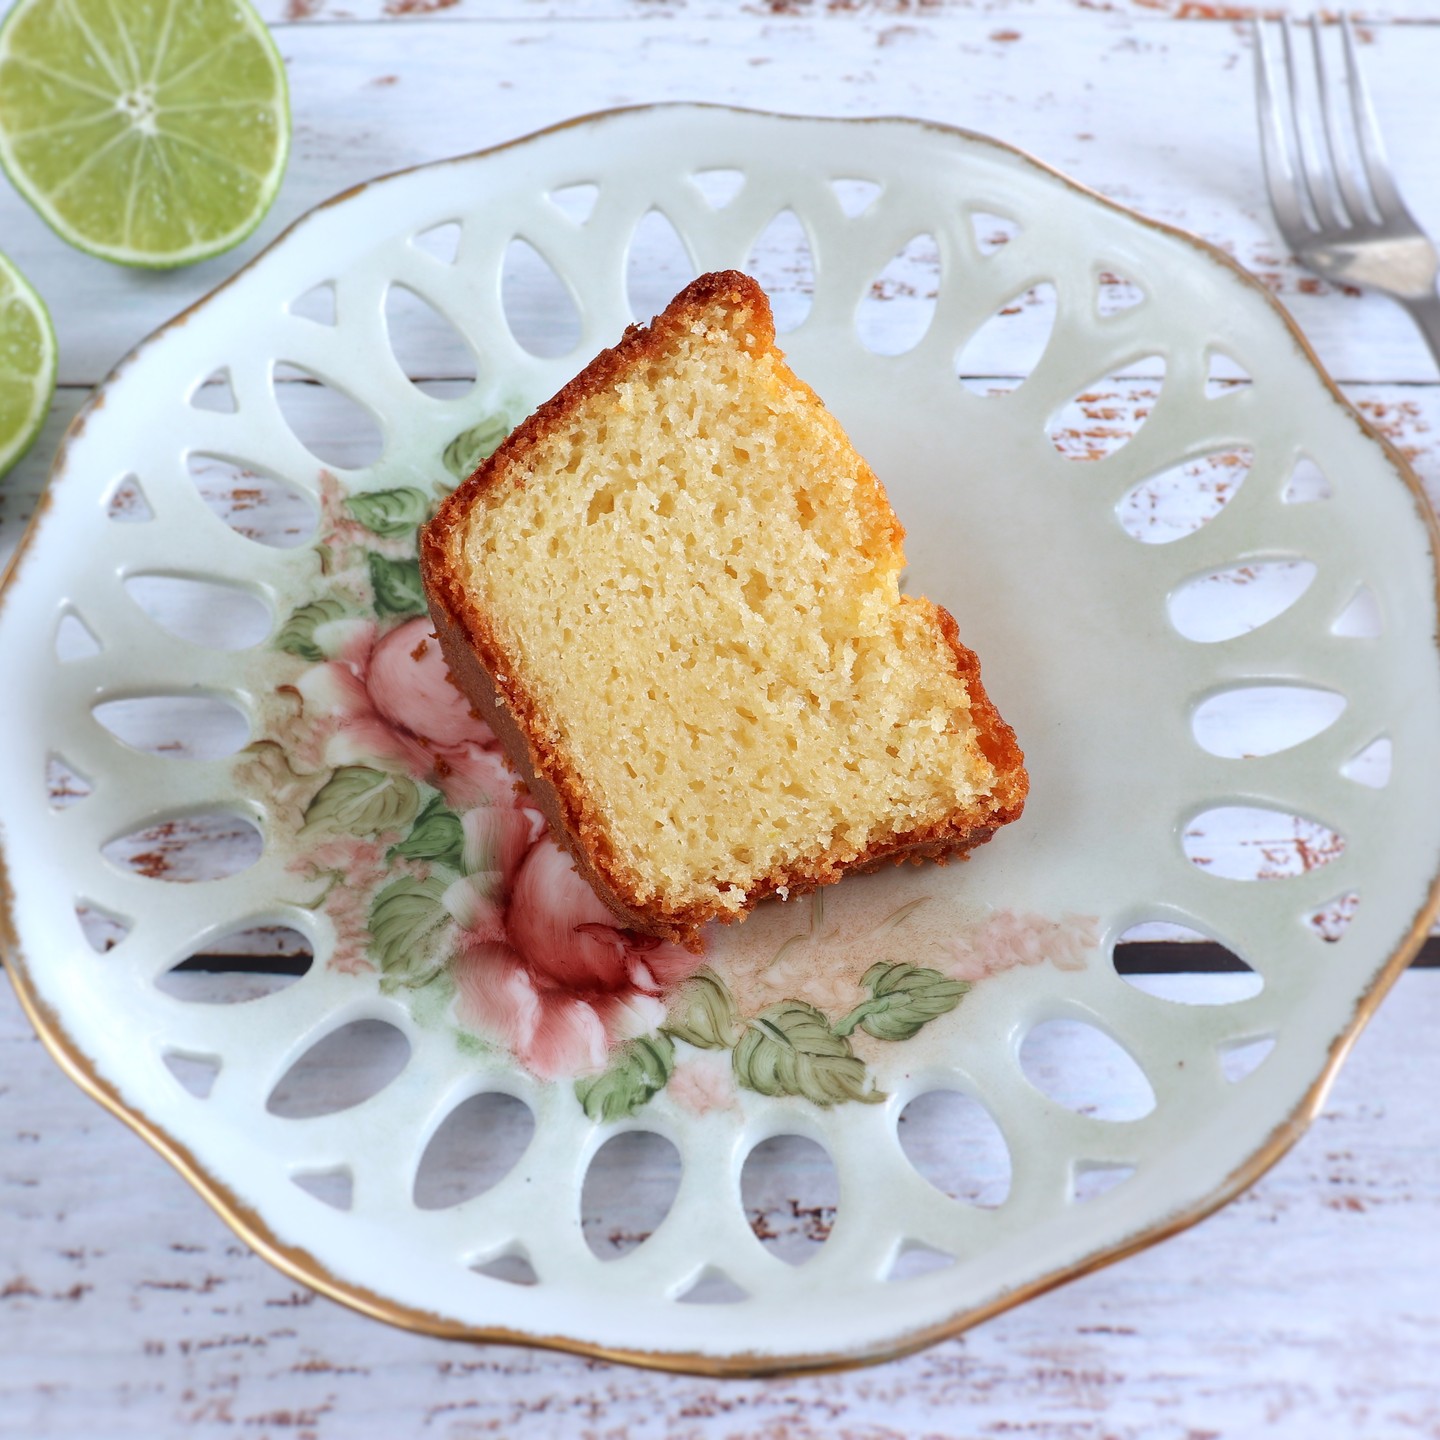 Lime yogurt cake | Food From Portugal

Do you like simple and homemade cakes? This delicious lime yogurt cake is fluffy, has few ingredients and is very simple to prepare. It's perfect for any occasion! Bon appetit!!!

Recipe: https://www.foodfromportugal.com/recipes/lime-yogurt-cake/

#food #easy #easyrecipes #instafood #recipe #recipes #homemade #cake #lime #limecake #yogurt #yogurtcake